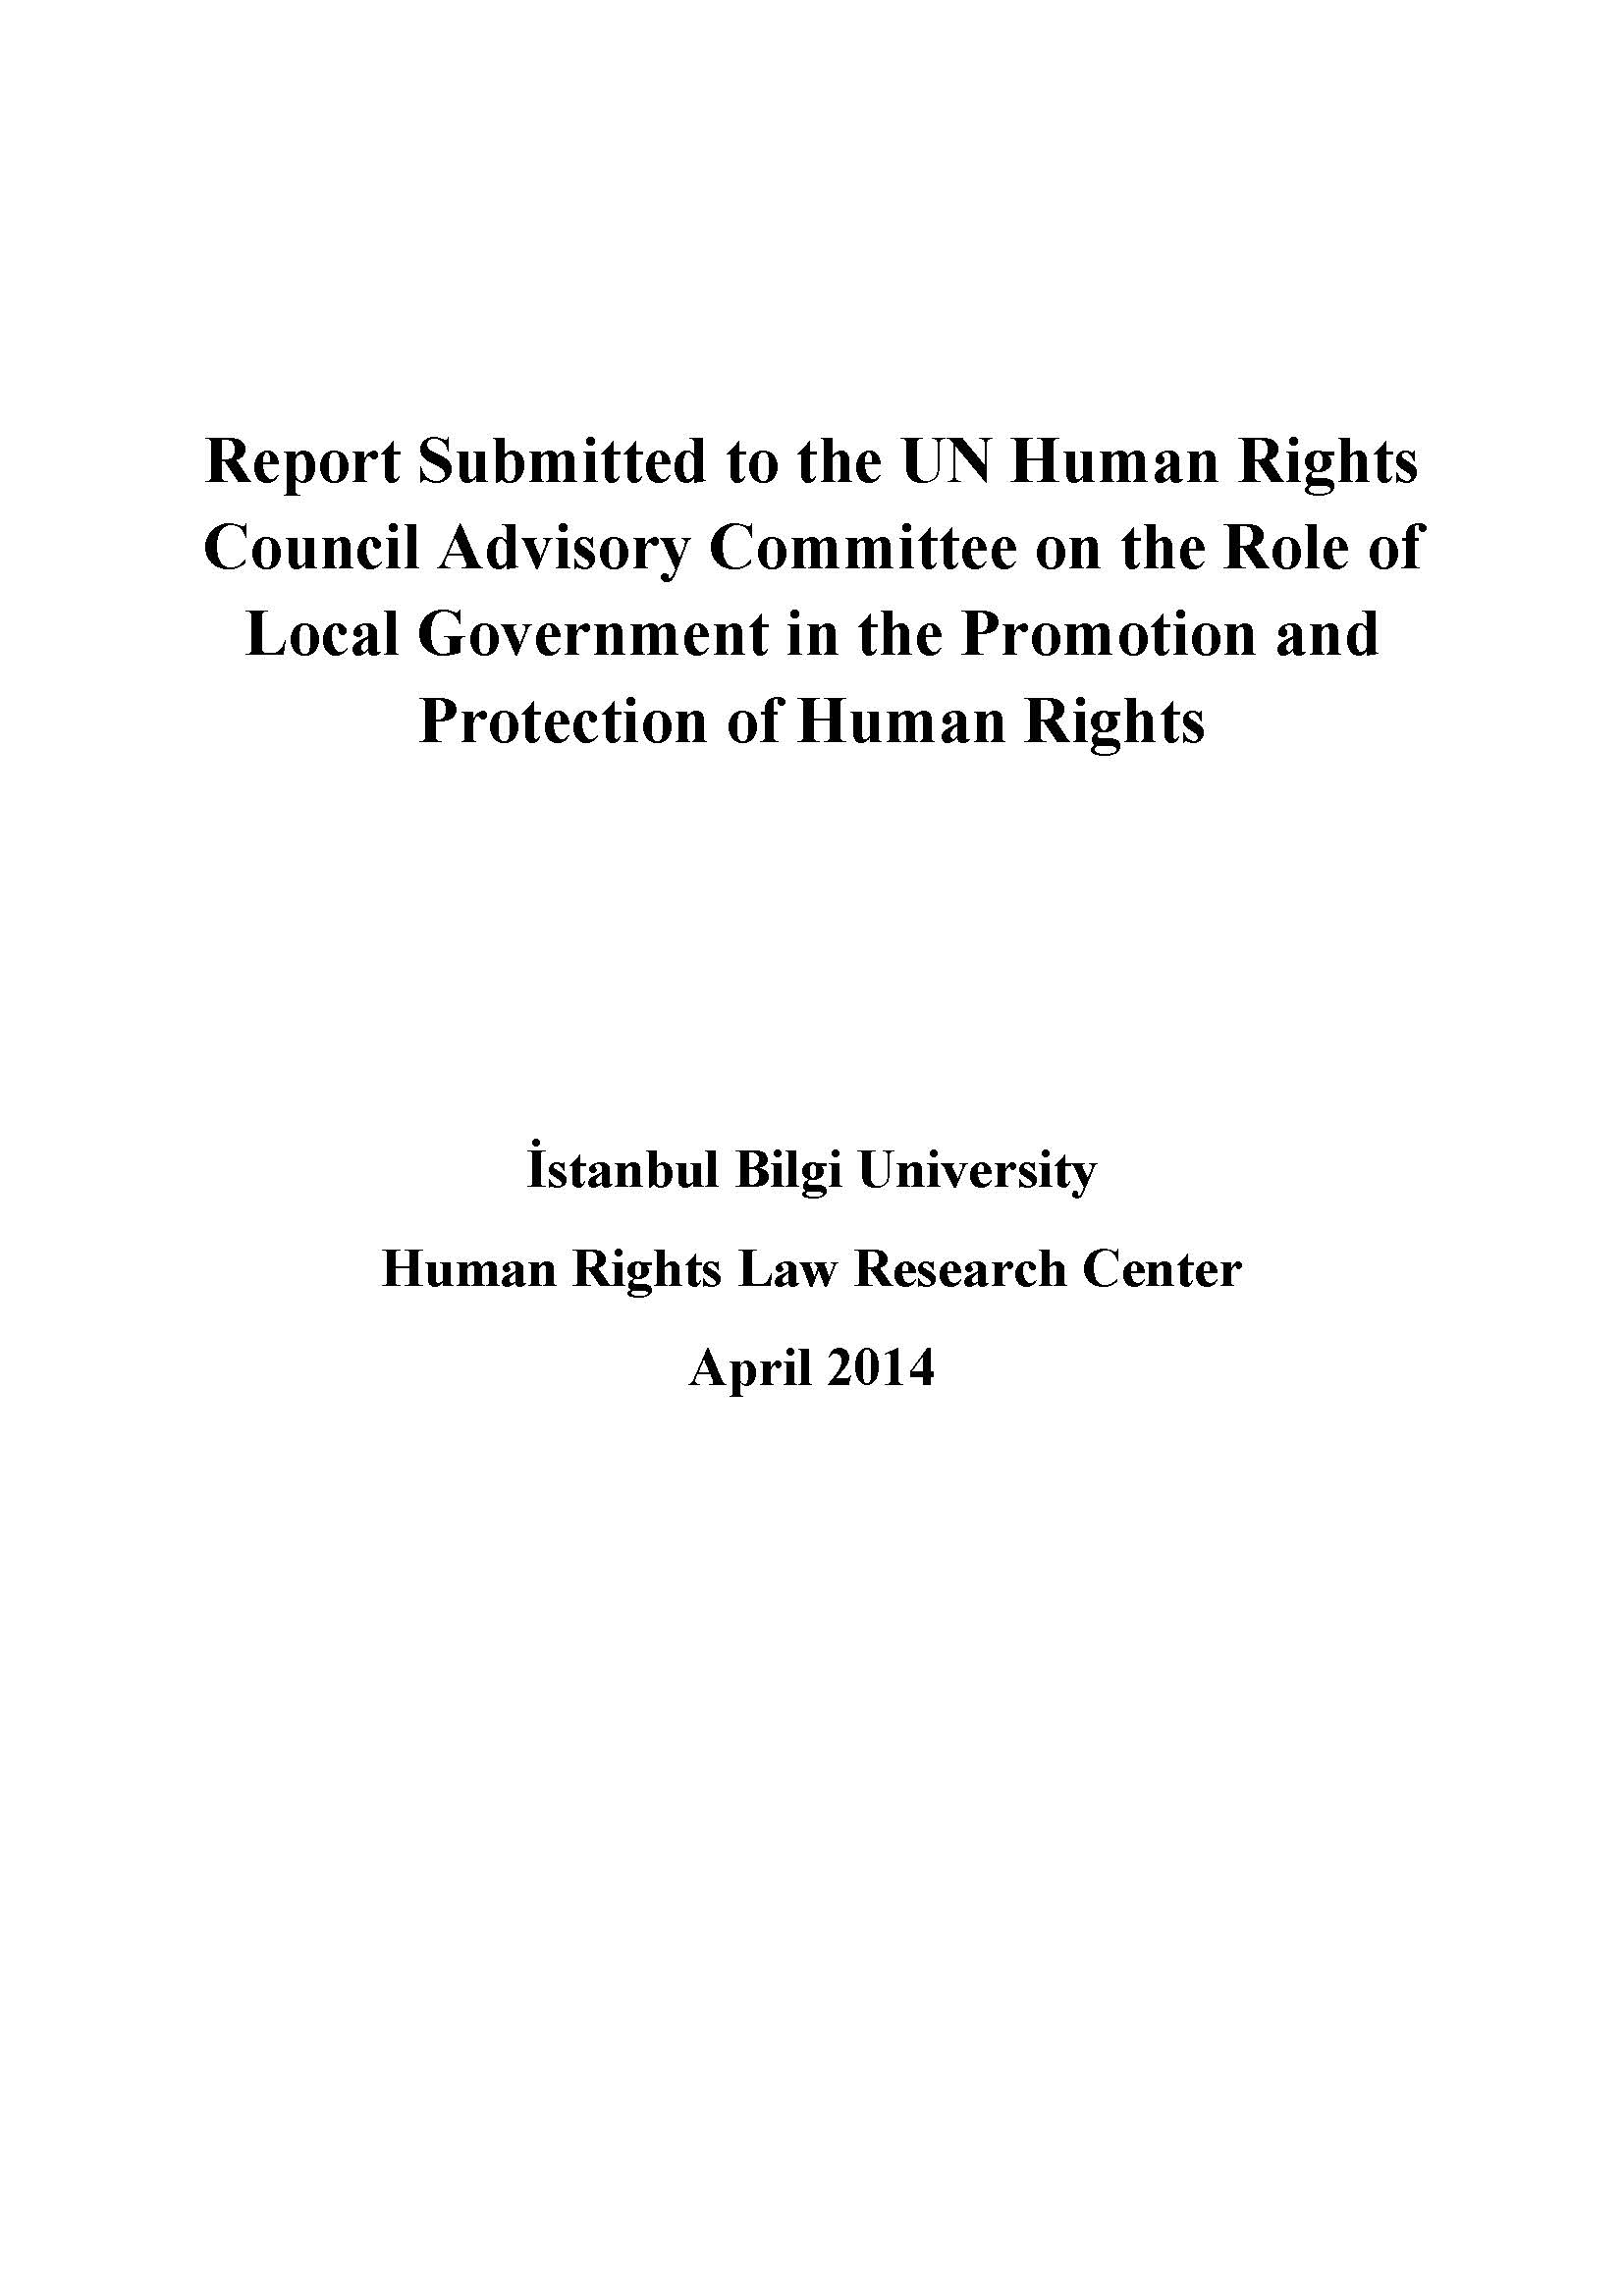 Role of Local Government in the Promotion and Protection of Human Rights